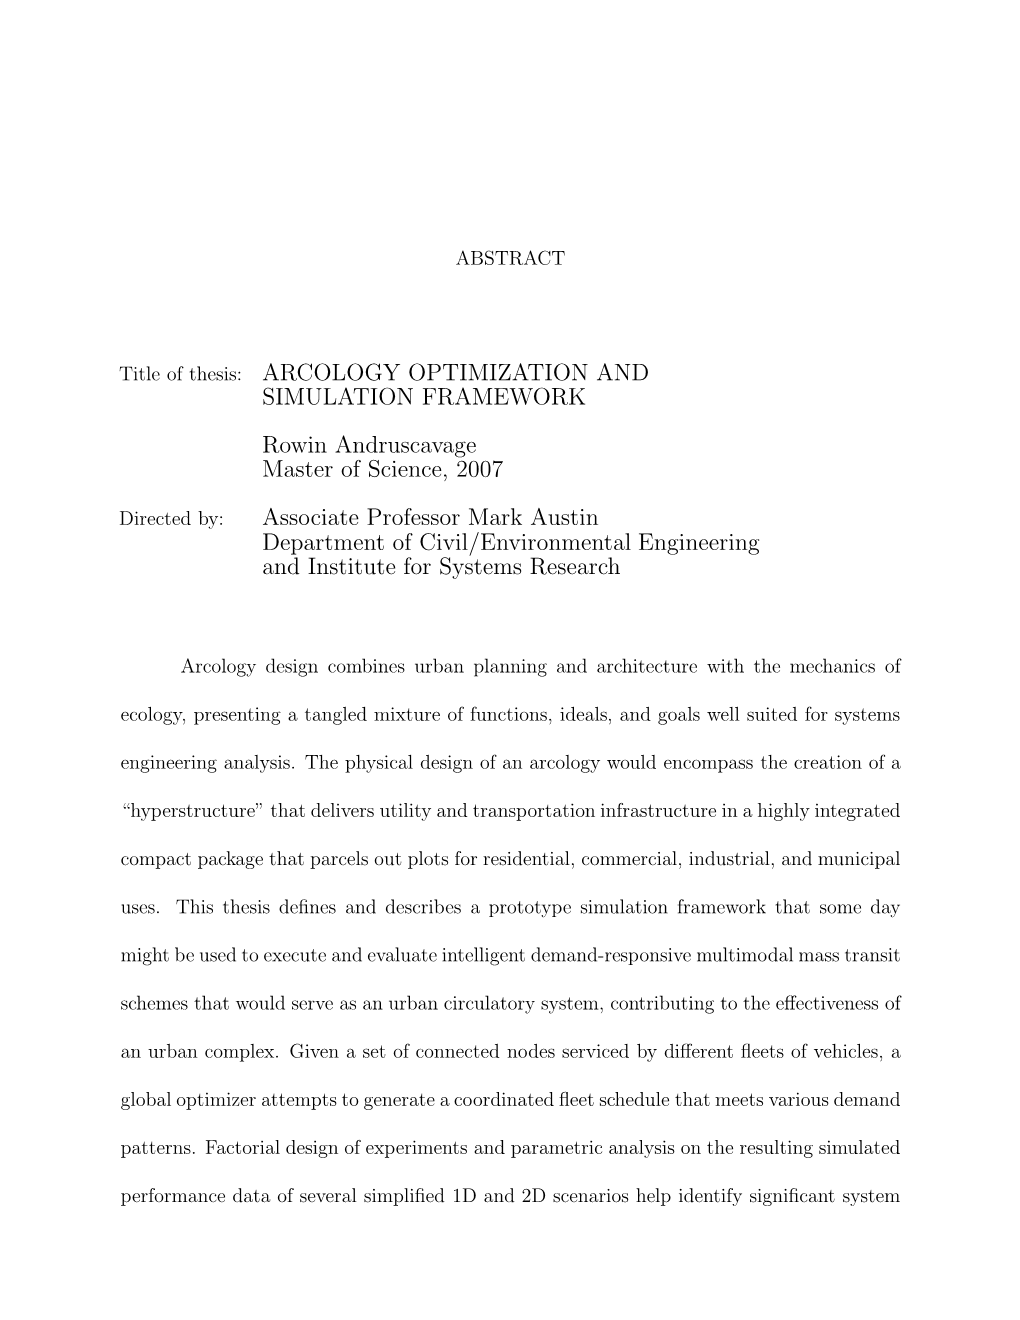 Title of Thesis: ARCOLOGY OPTIMIZATION and SIMULATION FRAMEWORK